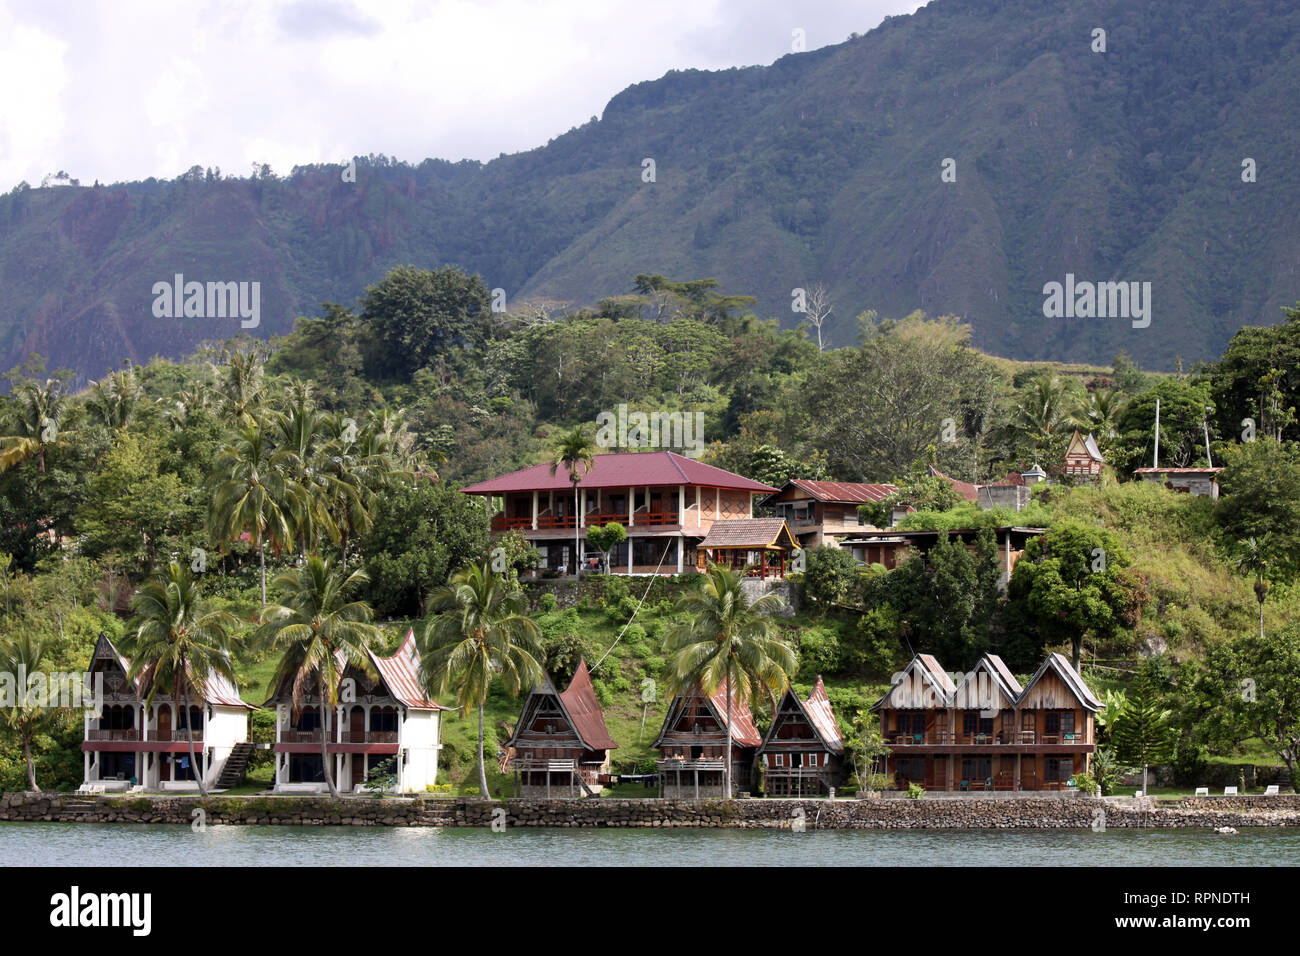 Lakeside holiday accommodation in traditional style Batak, île Samosir, Lac Toba, Sumatra Banque D'Images